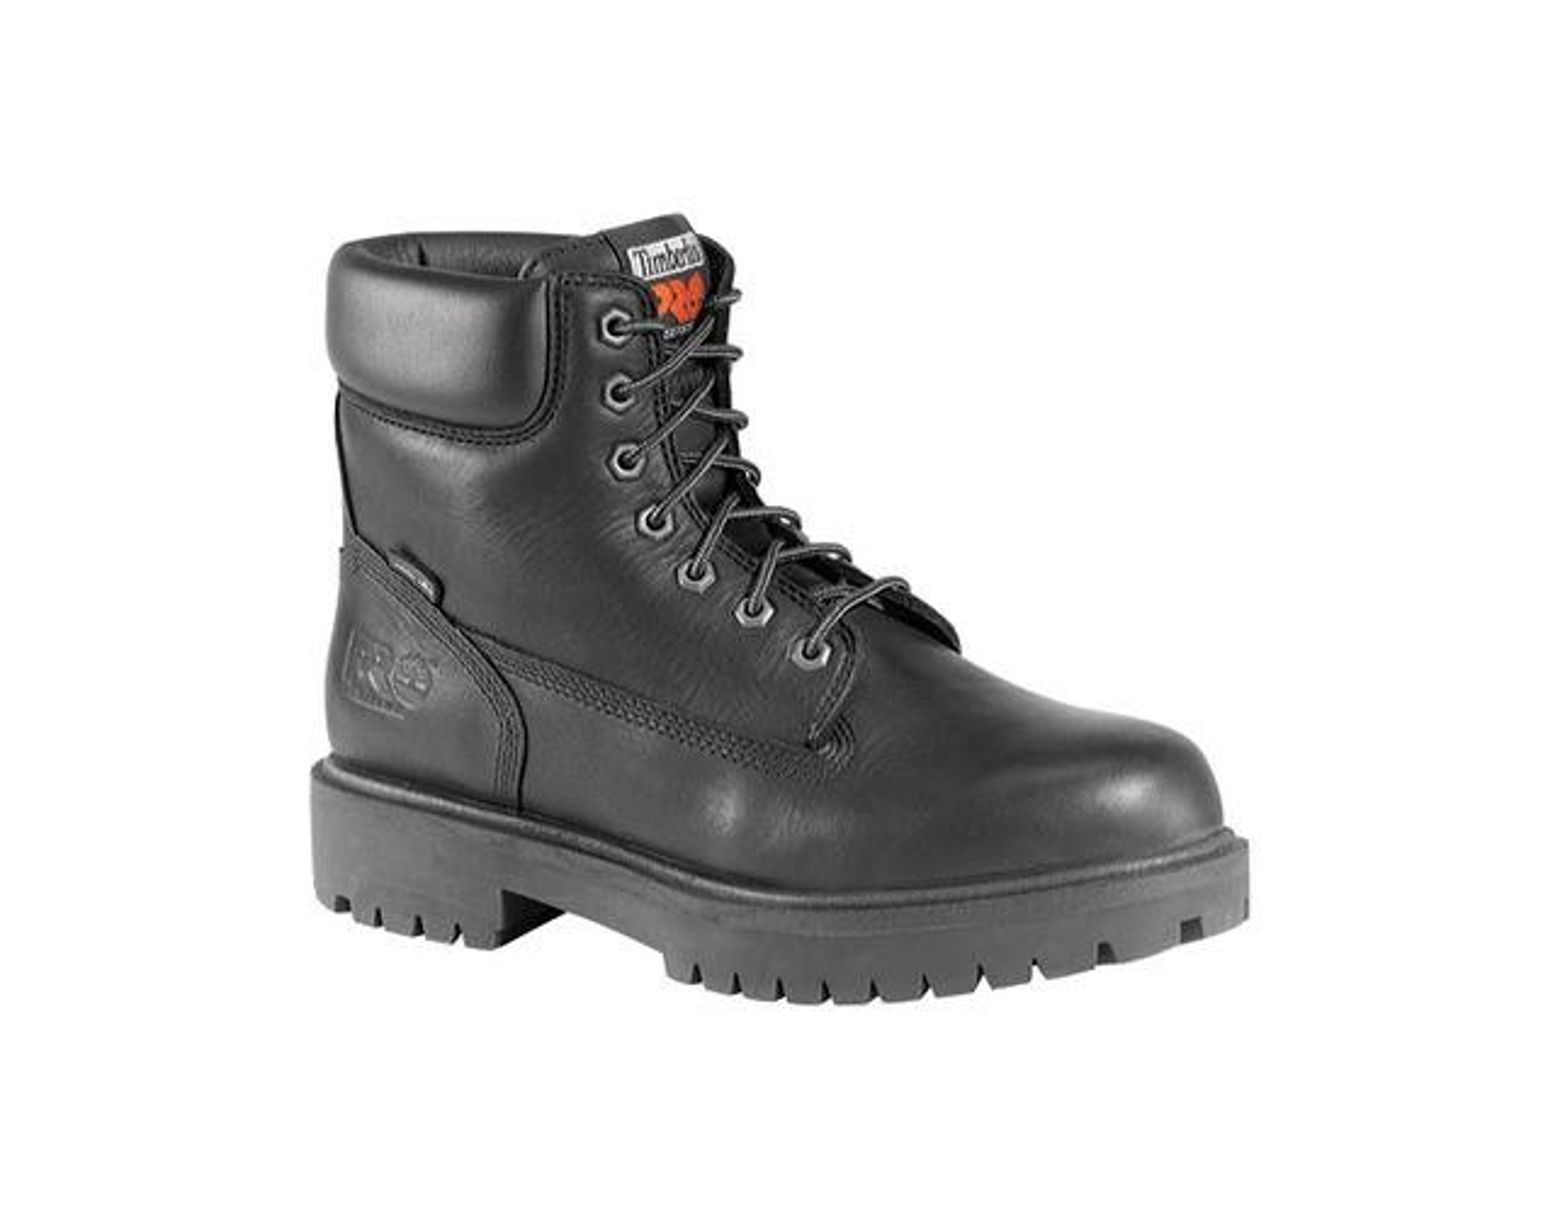 timberland pro boots men's waterproof insulated 26011